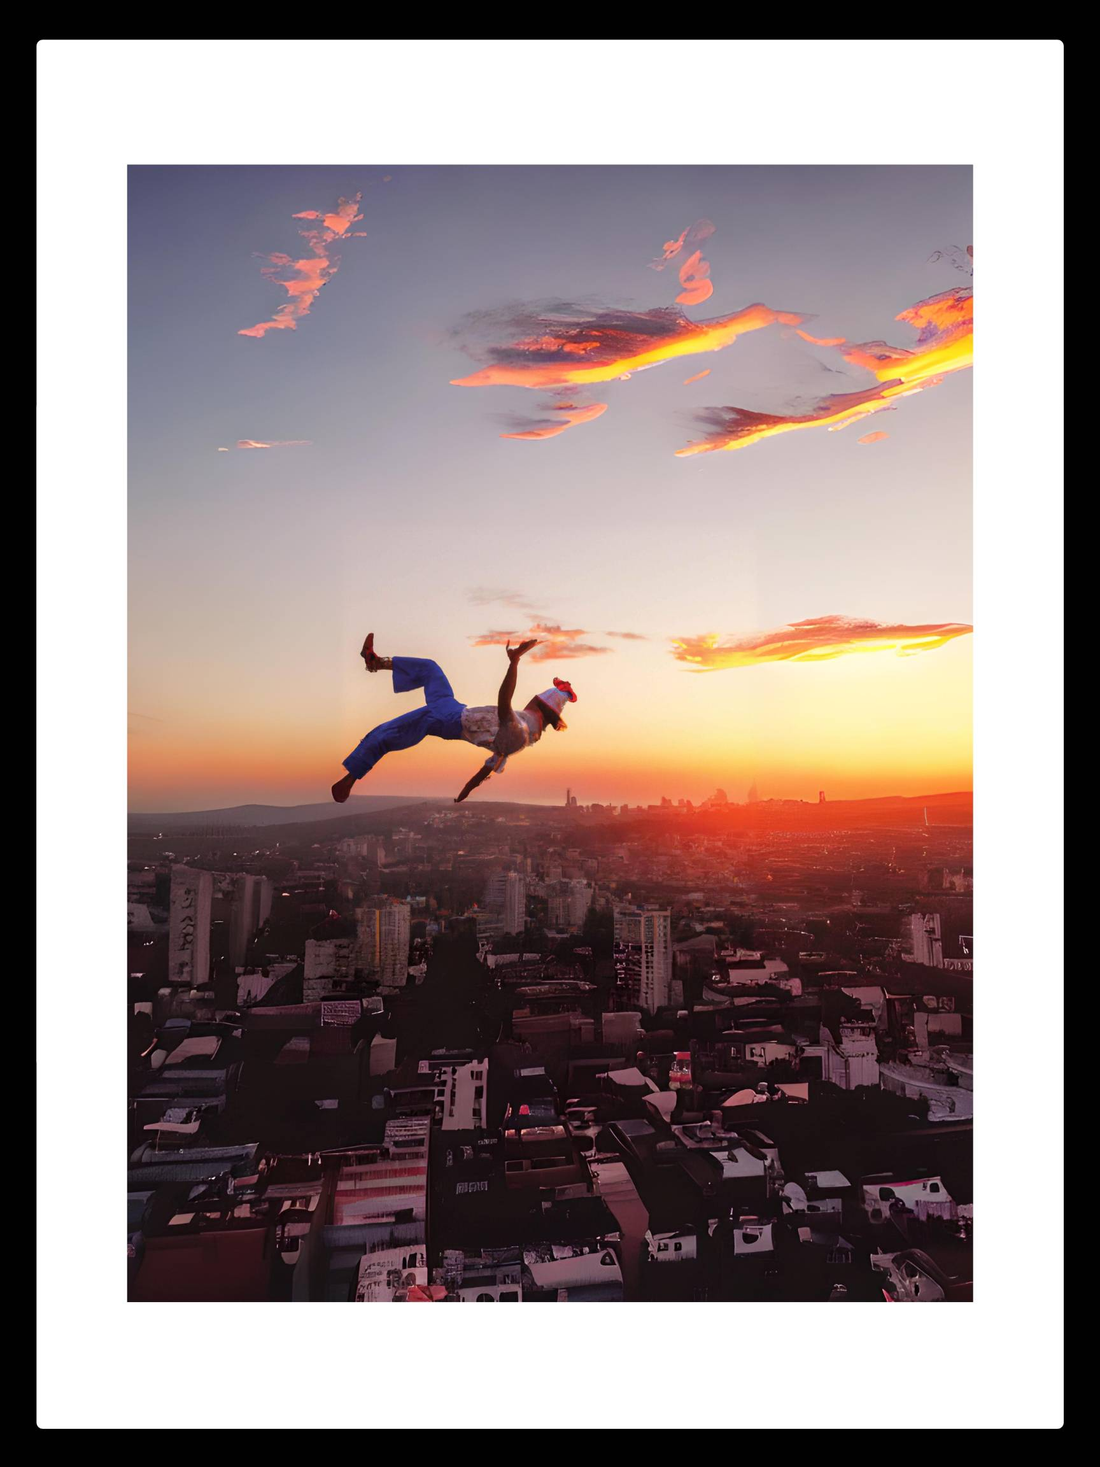 Cityscape Acrobat poster art featuring a clown ascending playfully against a backdrop of skyscrapers at sunset, embodying the joy and freedom of urban adventures.